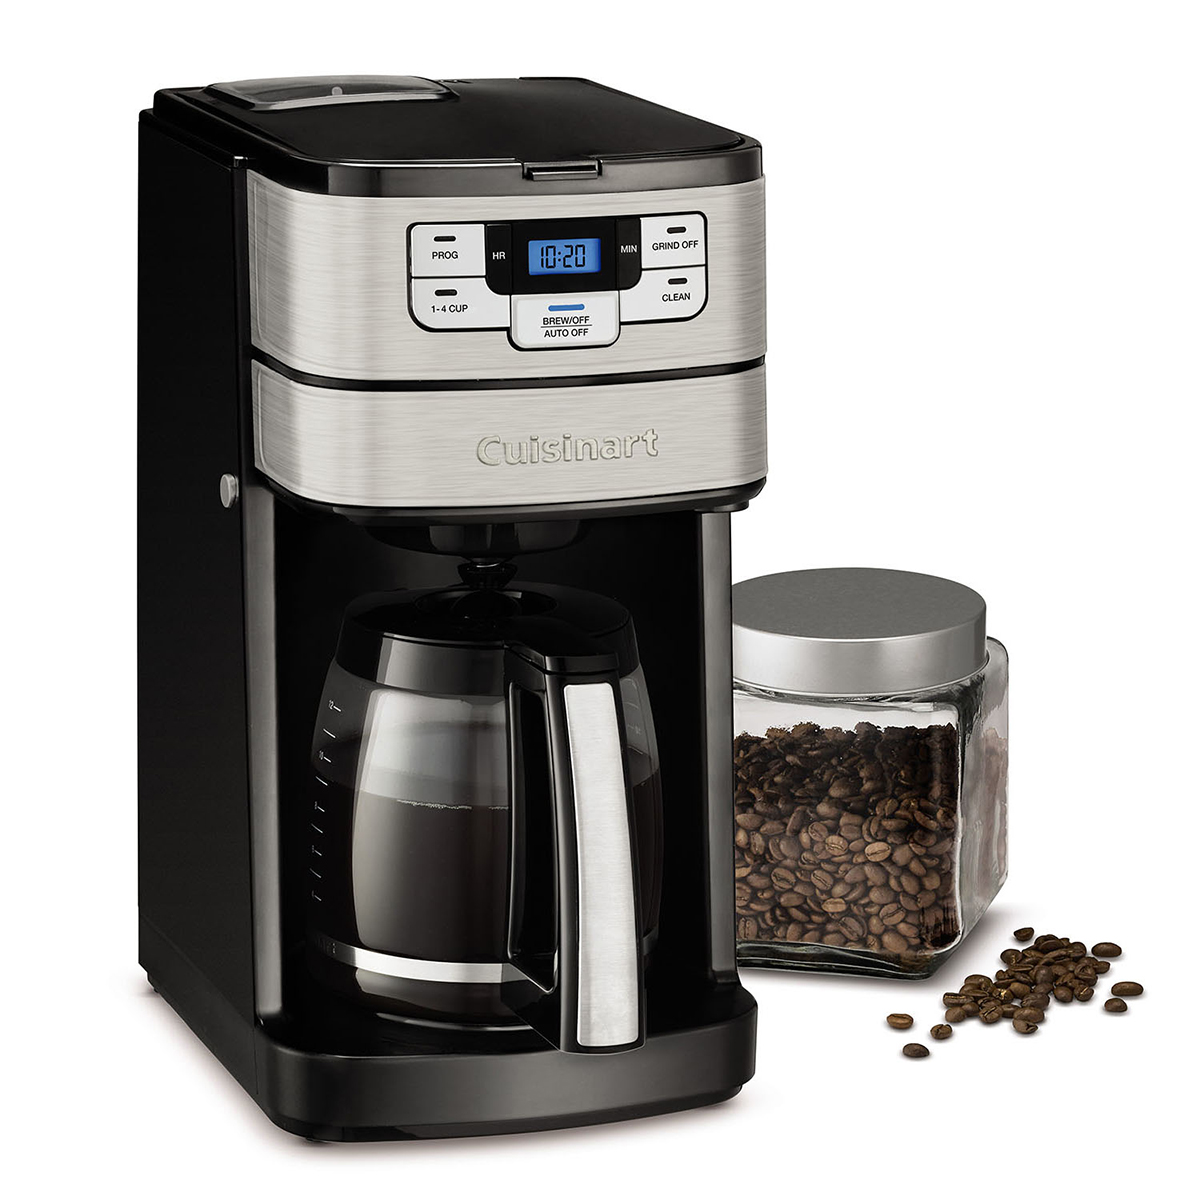 Cuisinart(R) Automatic Grind & Brew 12-Cup Coffee Maker